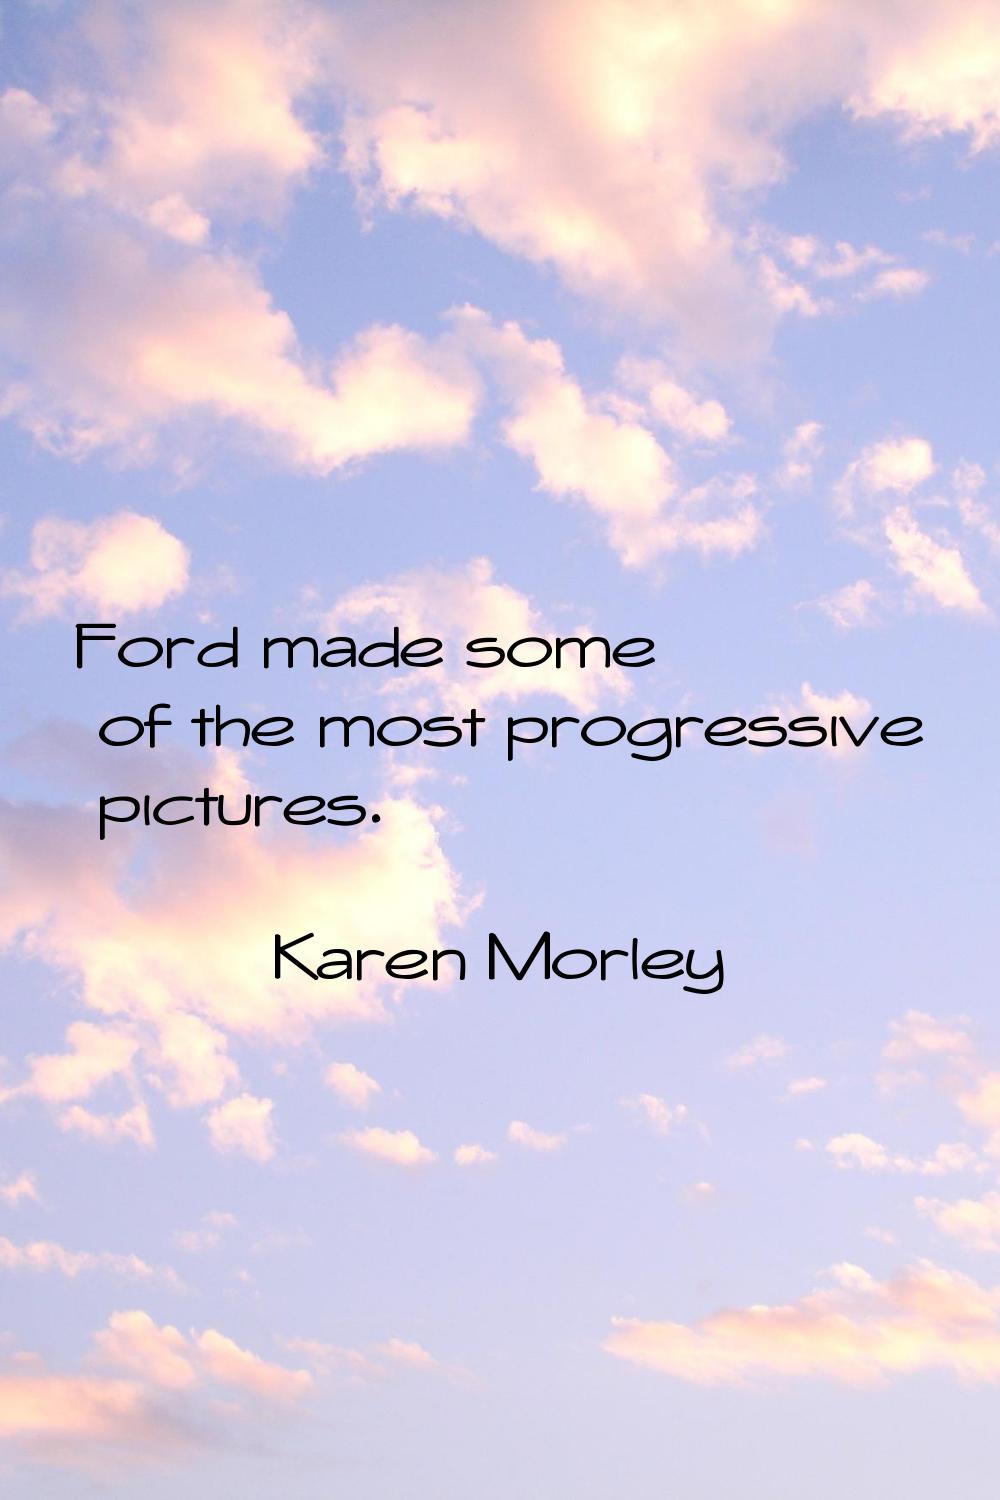 Ford made some of the most progressive pictures.